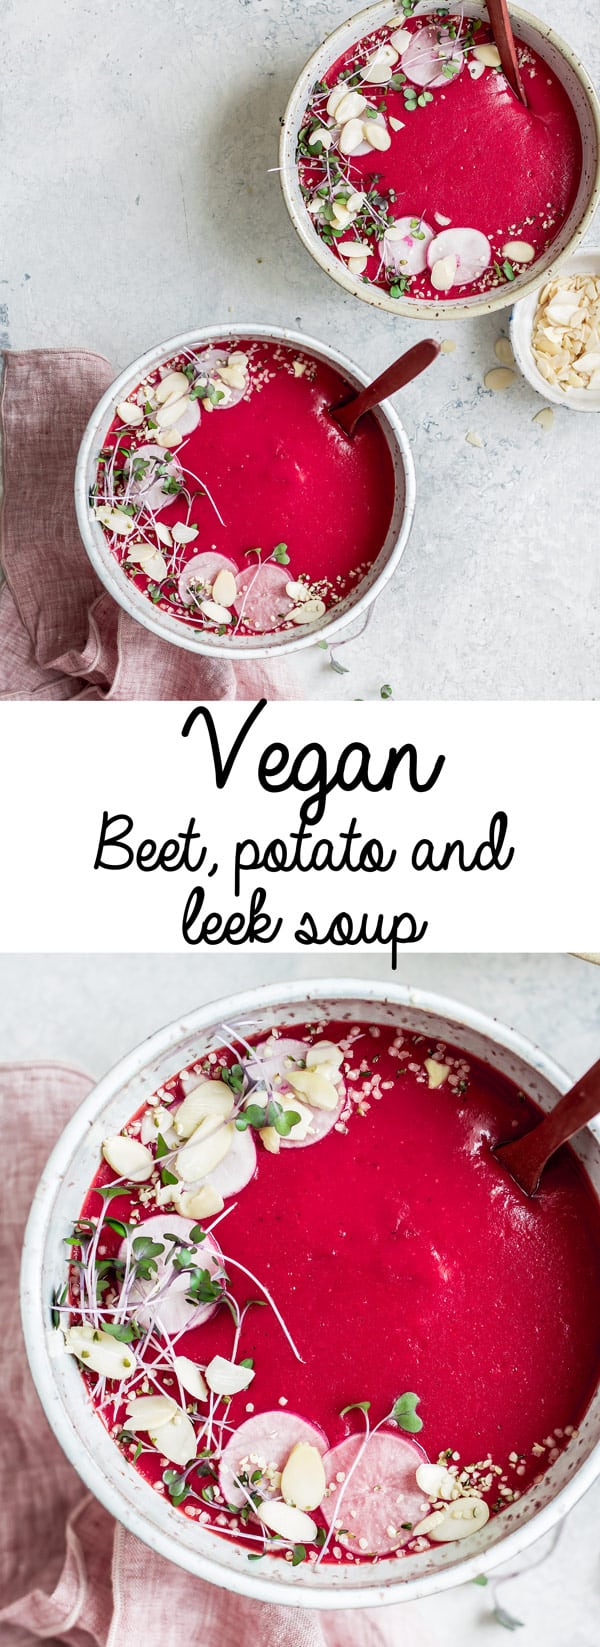 This vegan beet potato and leek soup recipe is creamy, healthy, and so easy to make. It's simply the best! 